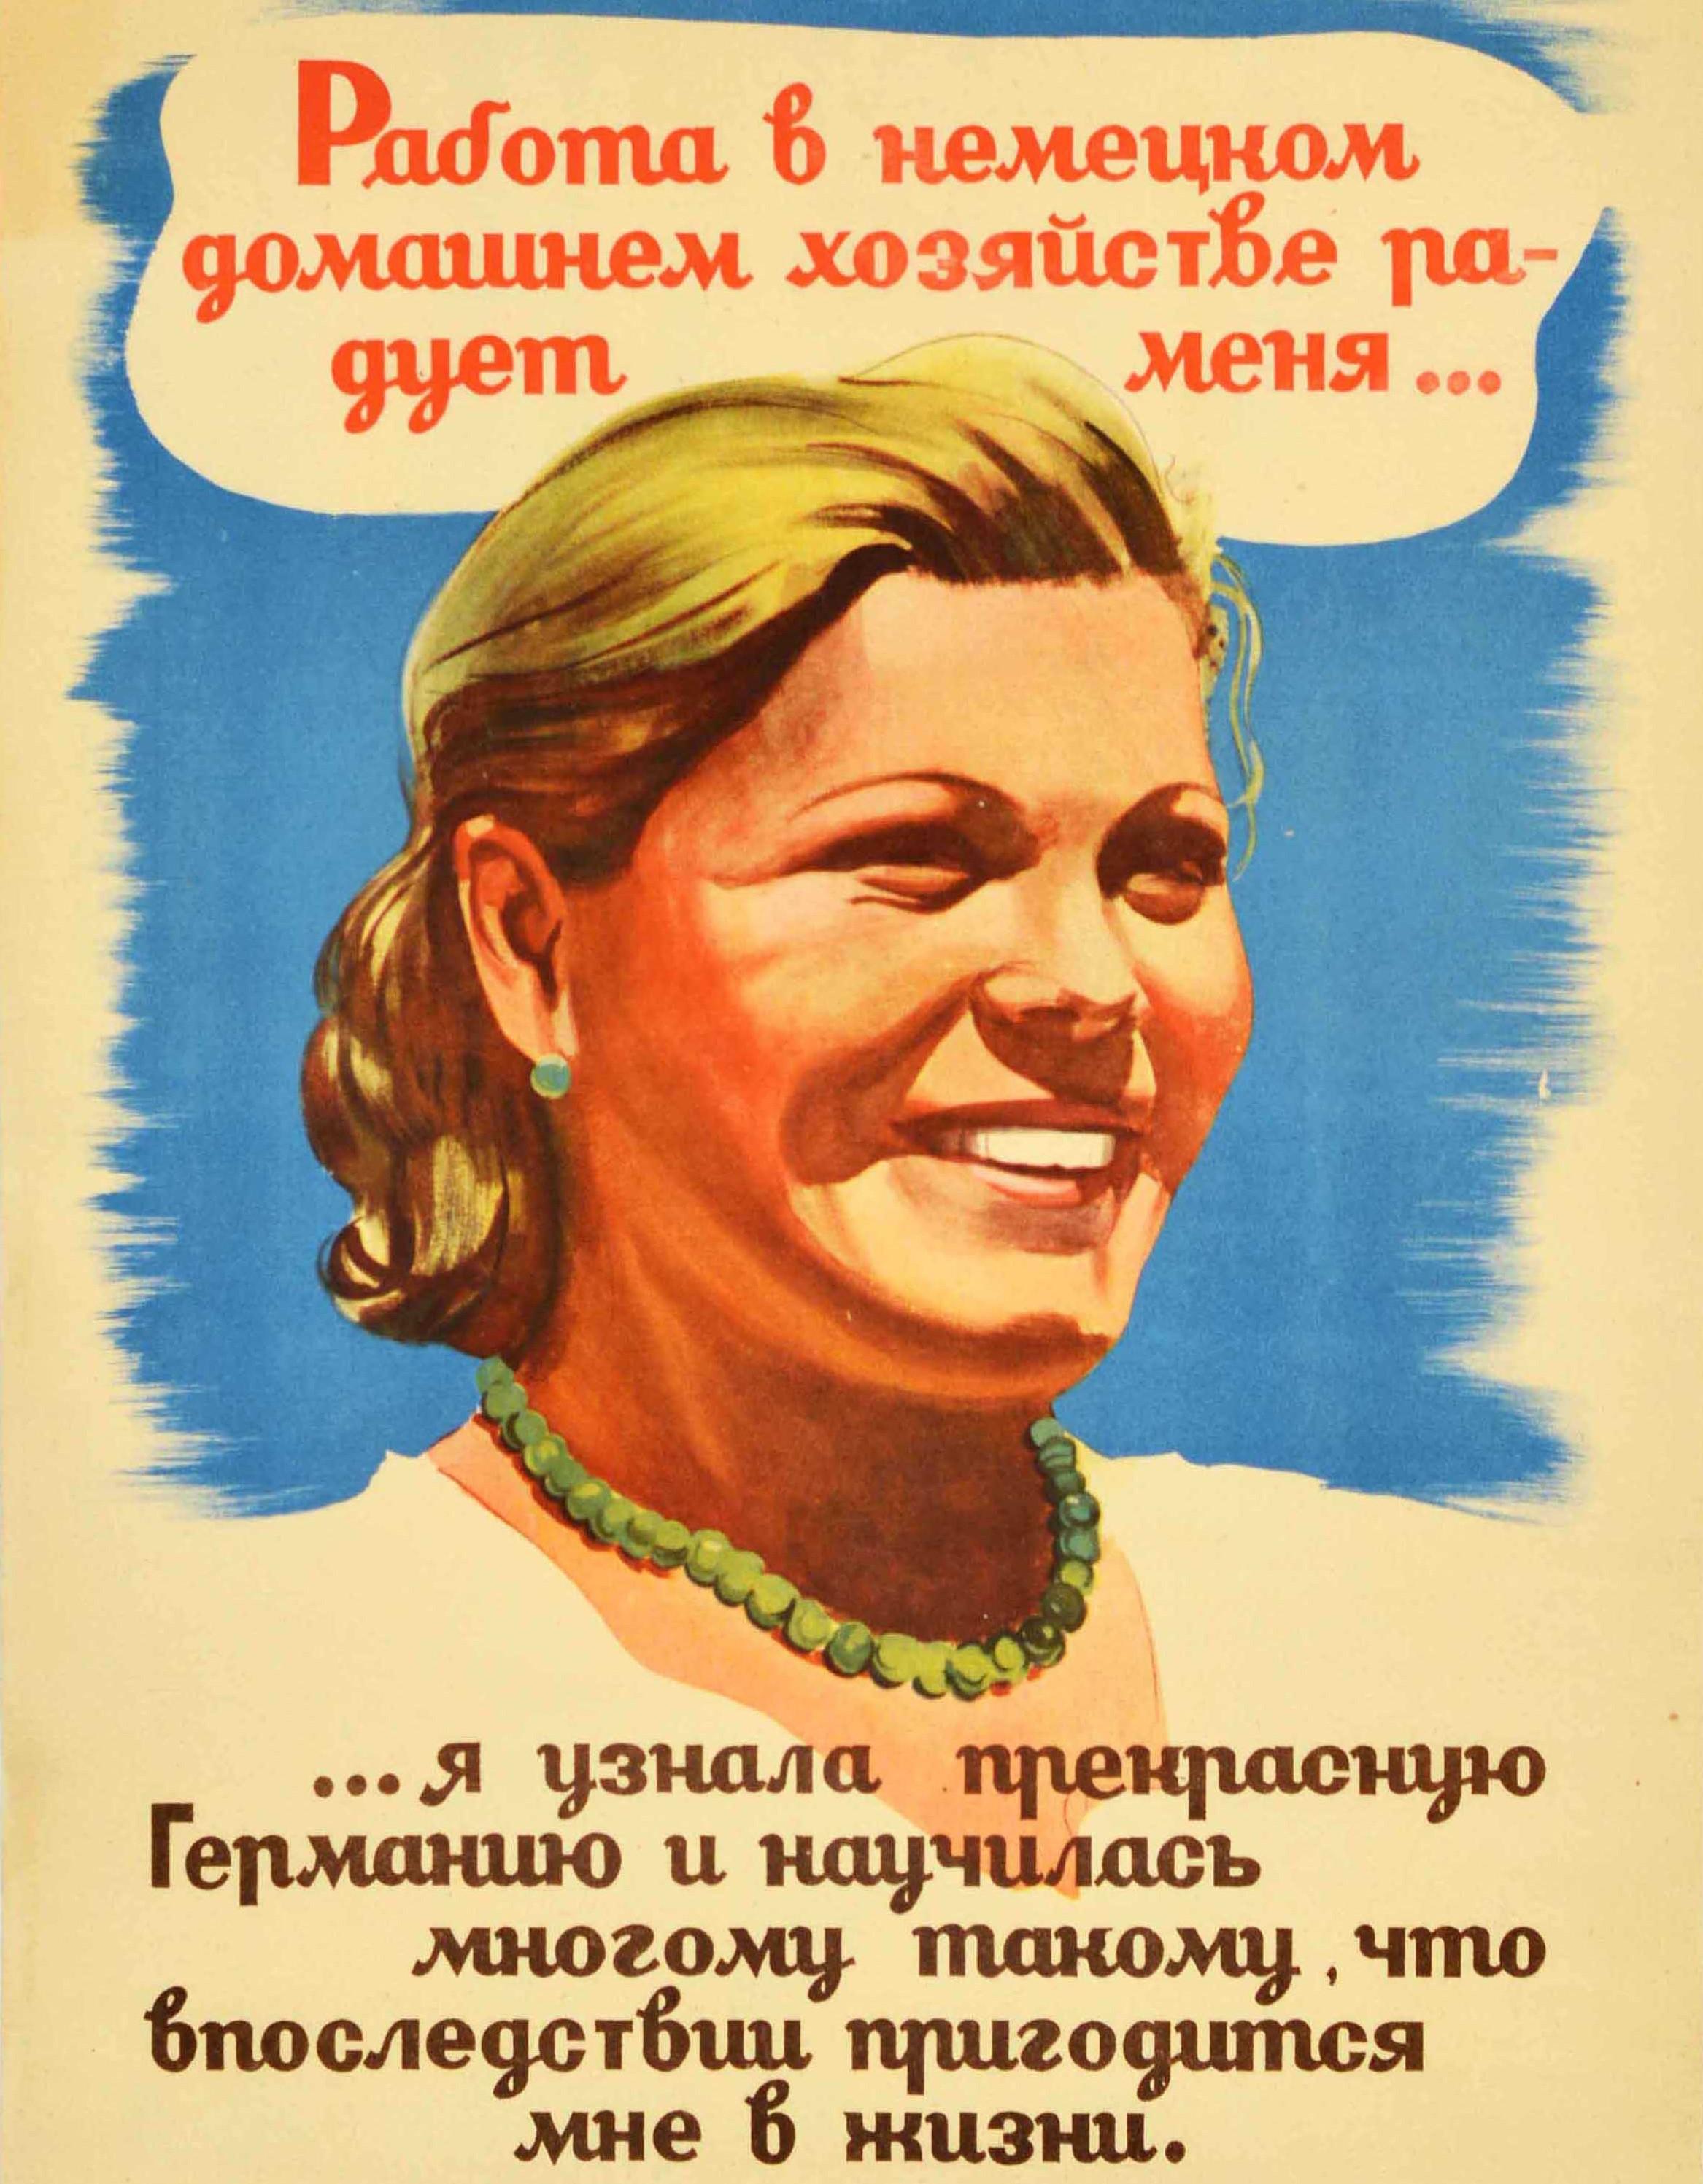 Original vintage World War Two anti-Soviet German Nazi political propaganda poster depicting a smiling lady against a blue background with the text in Russian in red on a white speech bubble and below reading - Working in a German household makes me